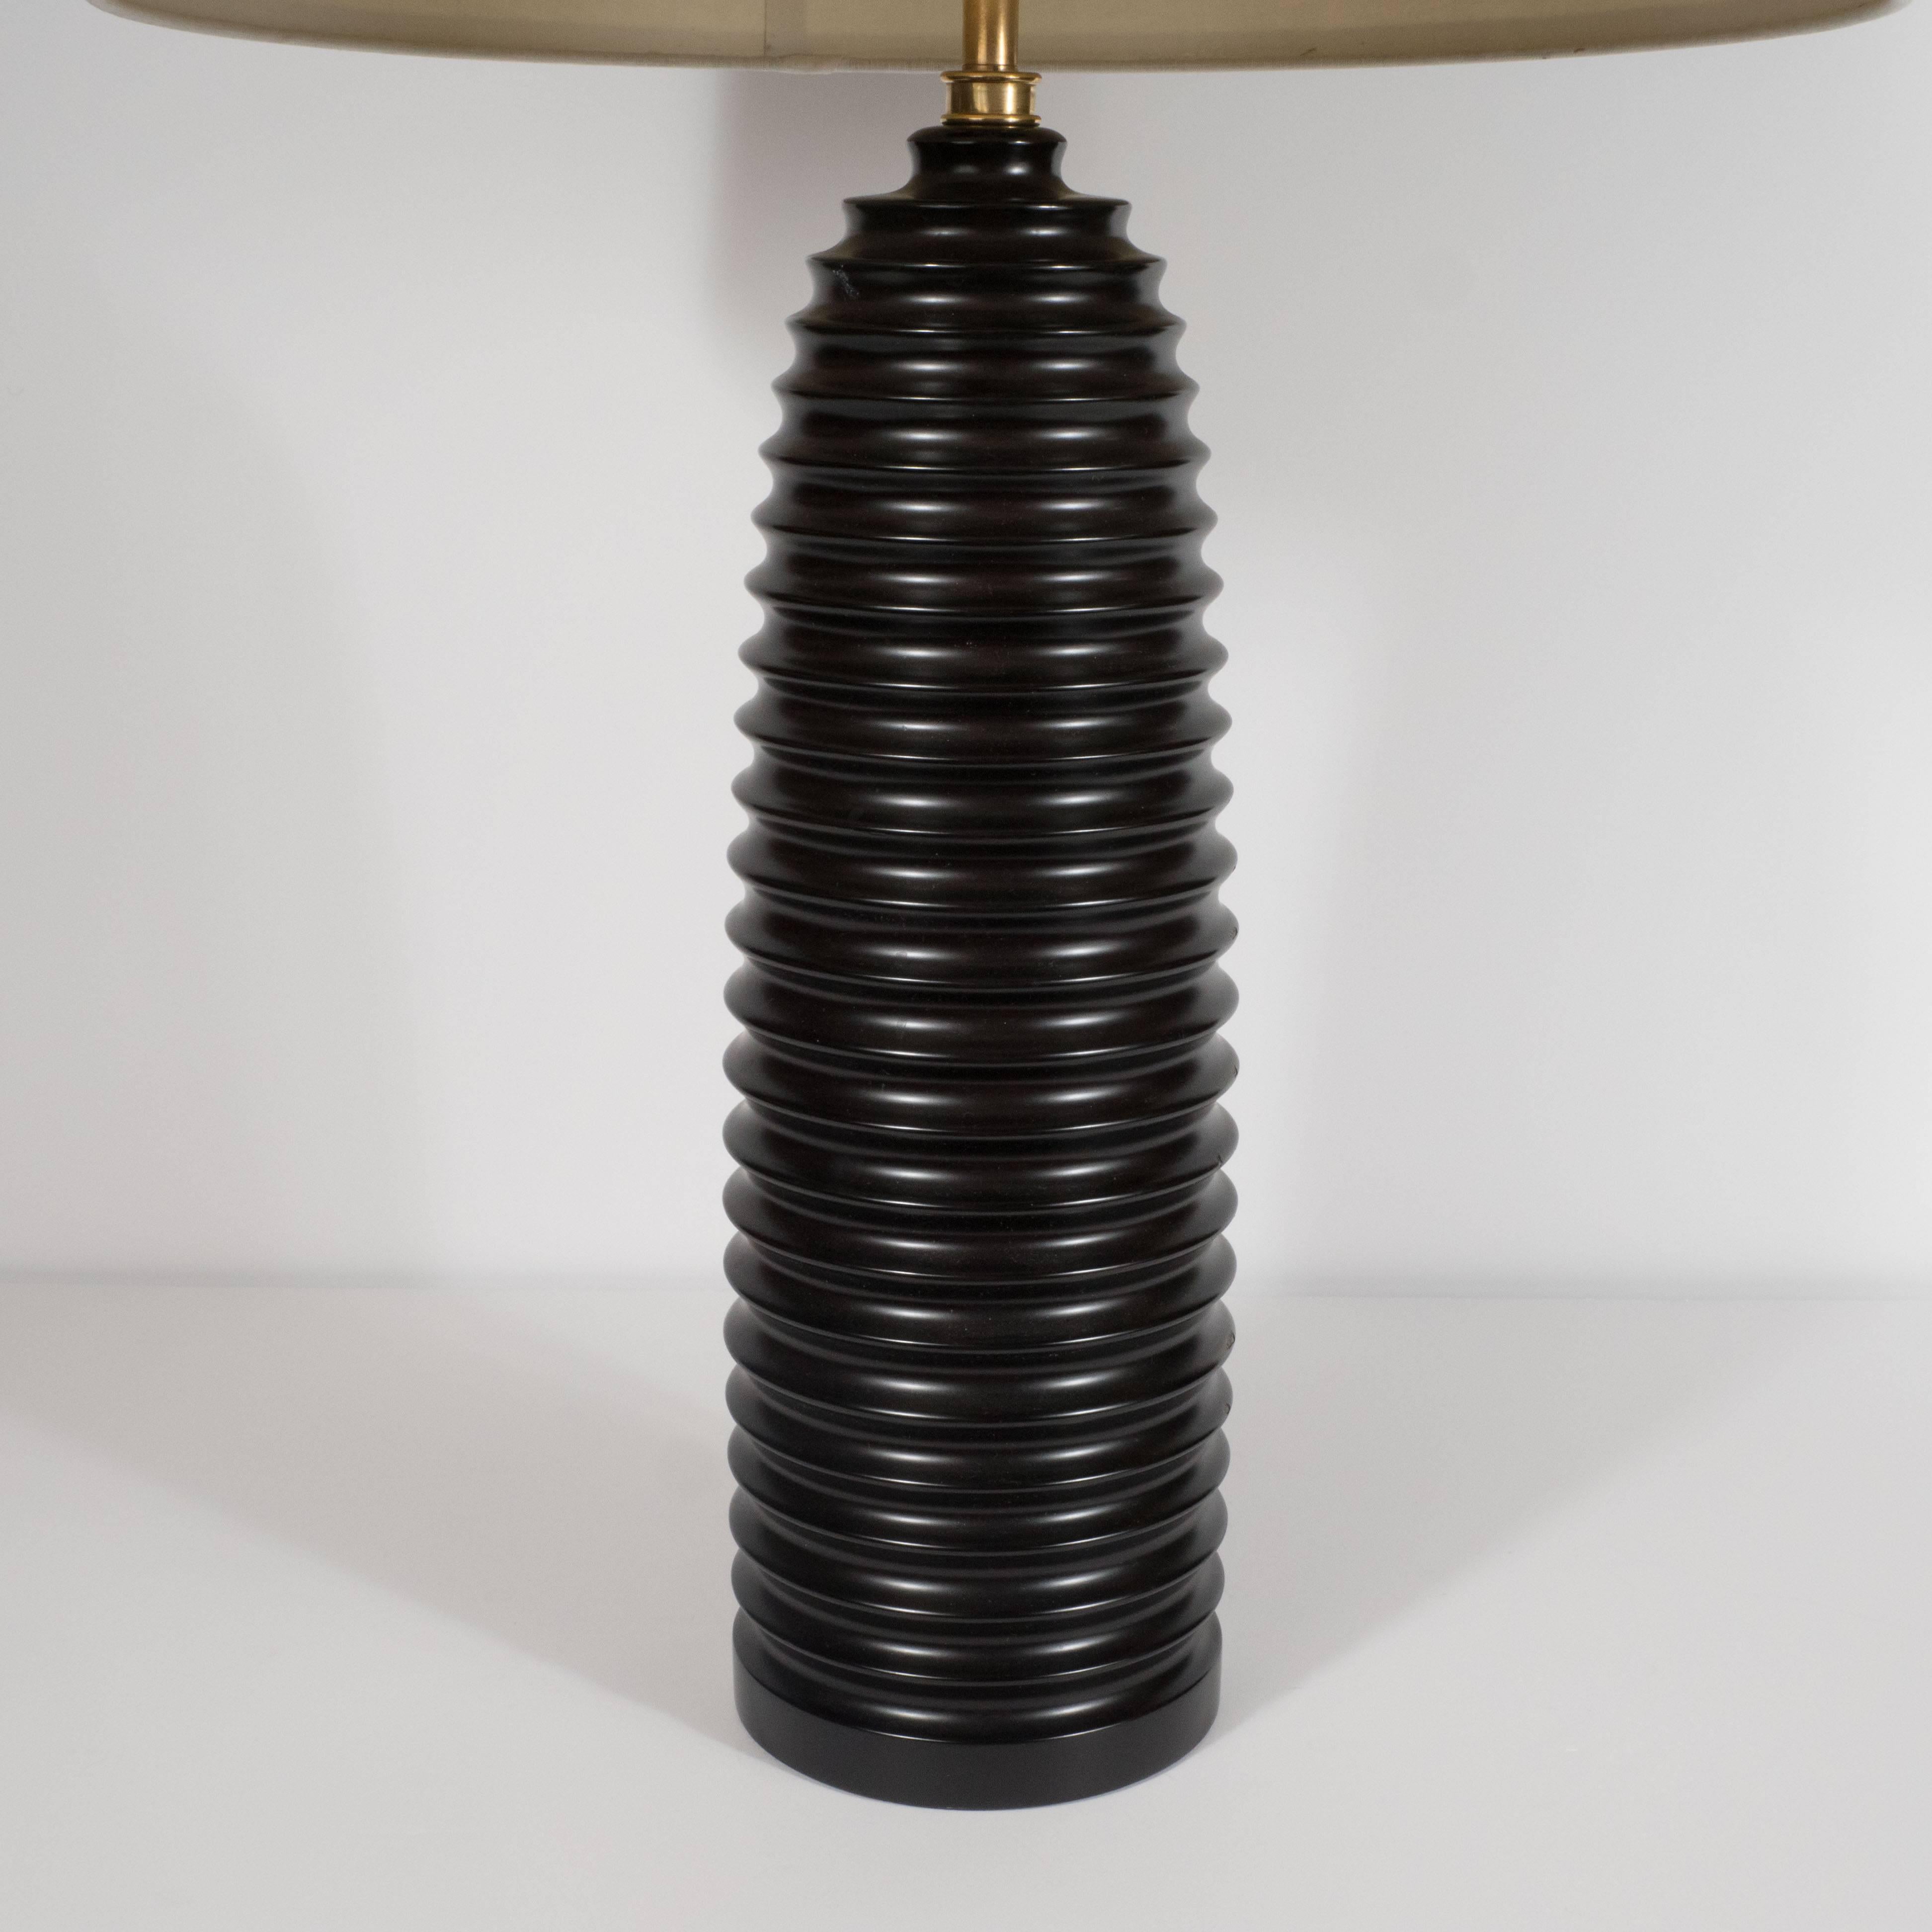 This sophisticated and understated pair of bullet lamps were realized by the esteemed California contemporary designer Marian Jamieson, who cut her teeth designing under the illustrious J. Robert Scott. These pieces testify to her refined design